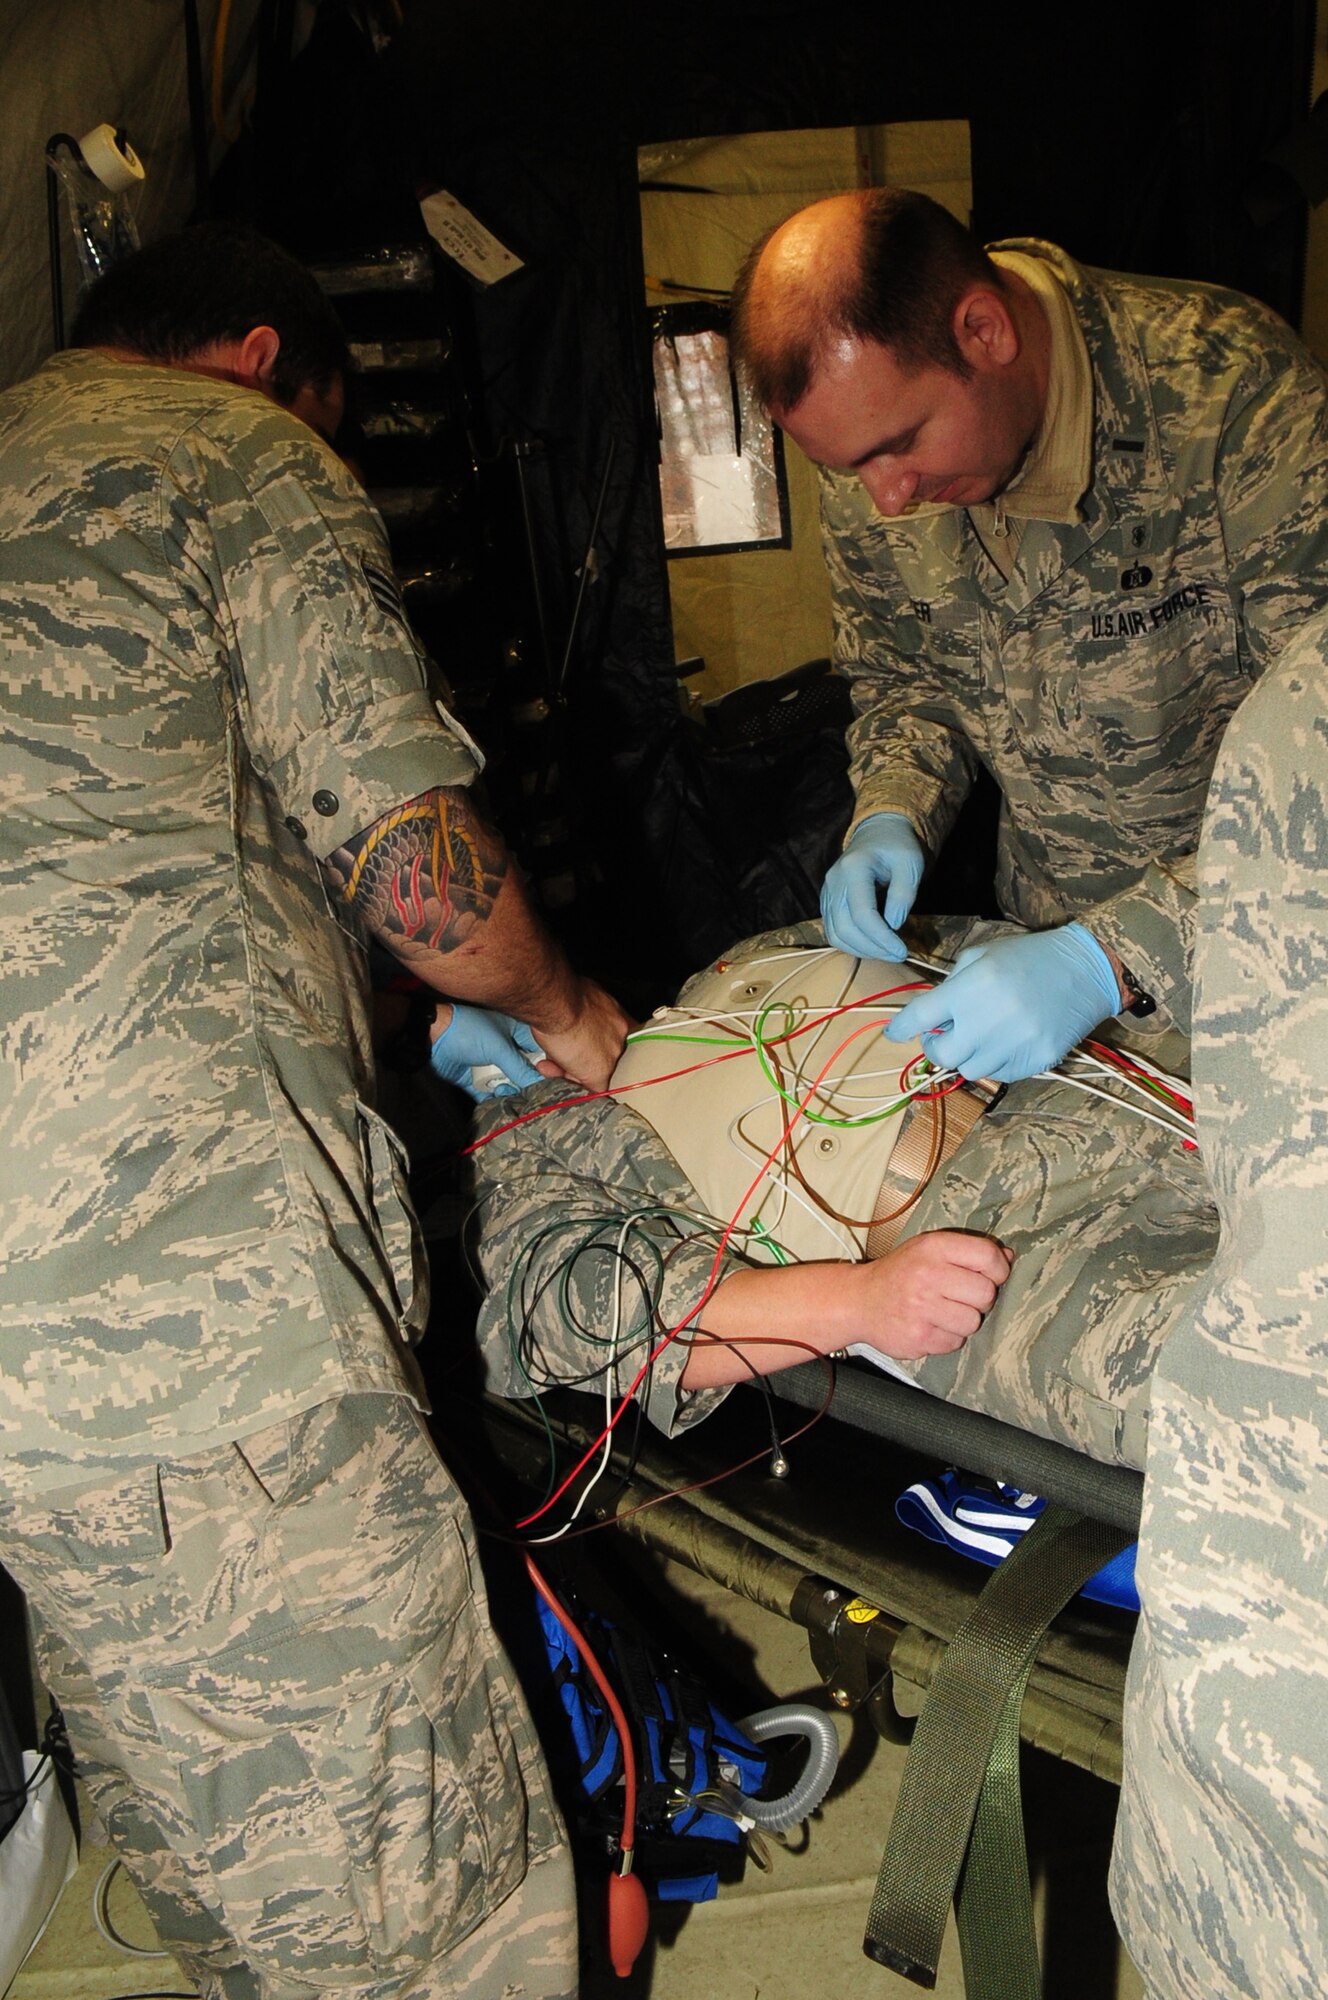 Medics try to resuscitate an Airman during an expeditionary Medical Support Exercise, Ramstein Air Base, Dec. 01, 2011. EMEDS was a week-long exercise for the 86th and 31st Medical Group to hone their skills in a mock-deployed environment. (U.S. Air Force photo by Senior Airman Aaron-Forrest Wainwright)